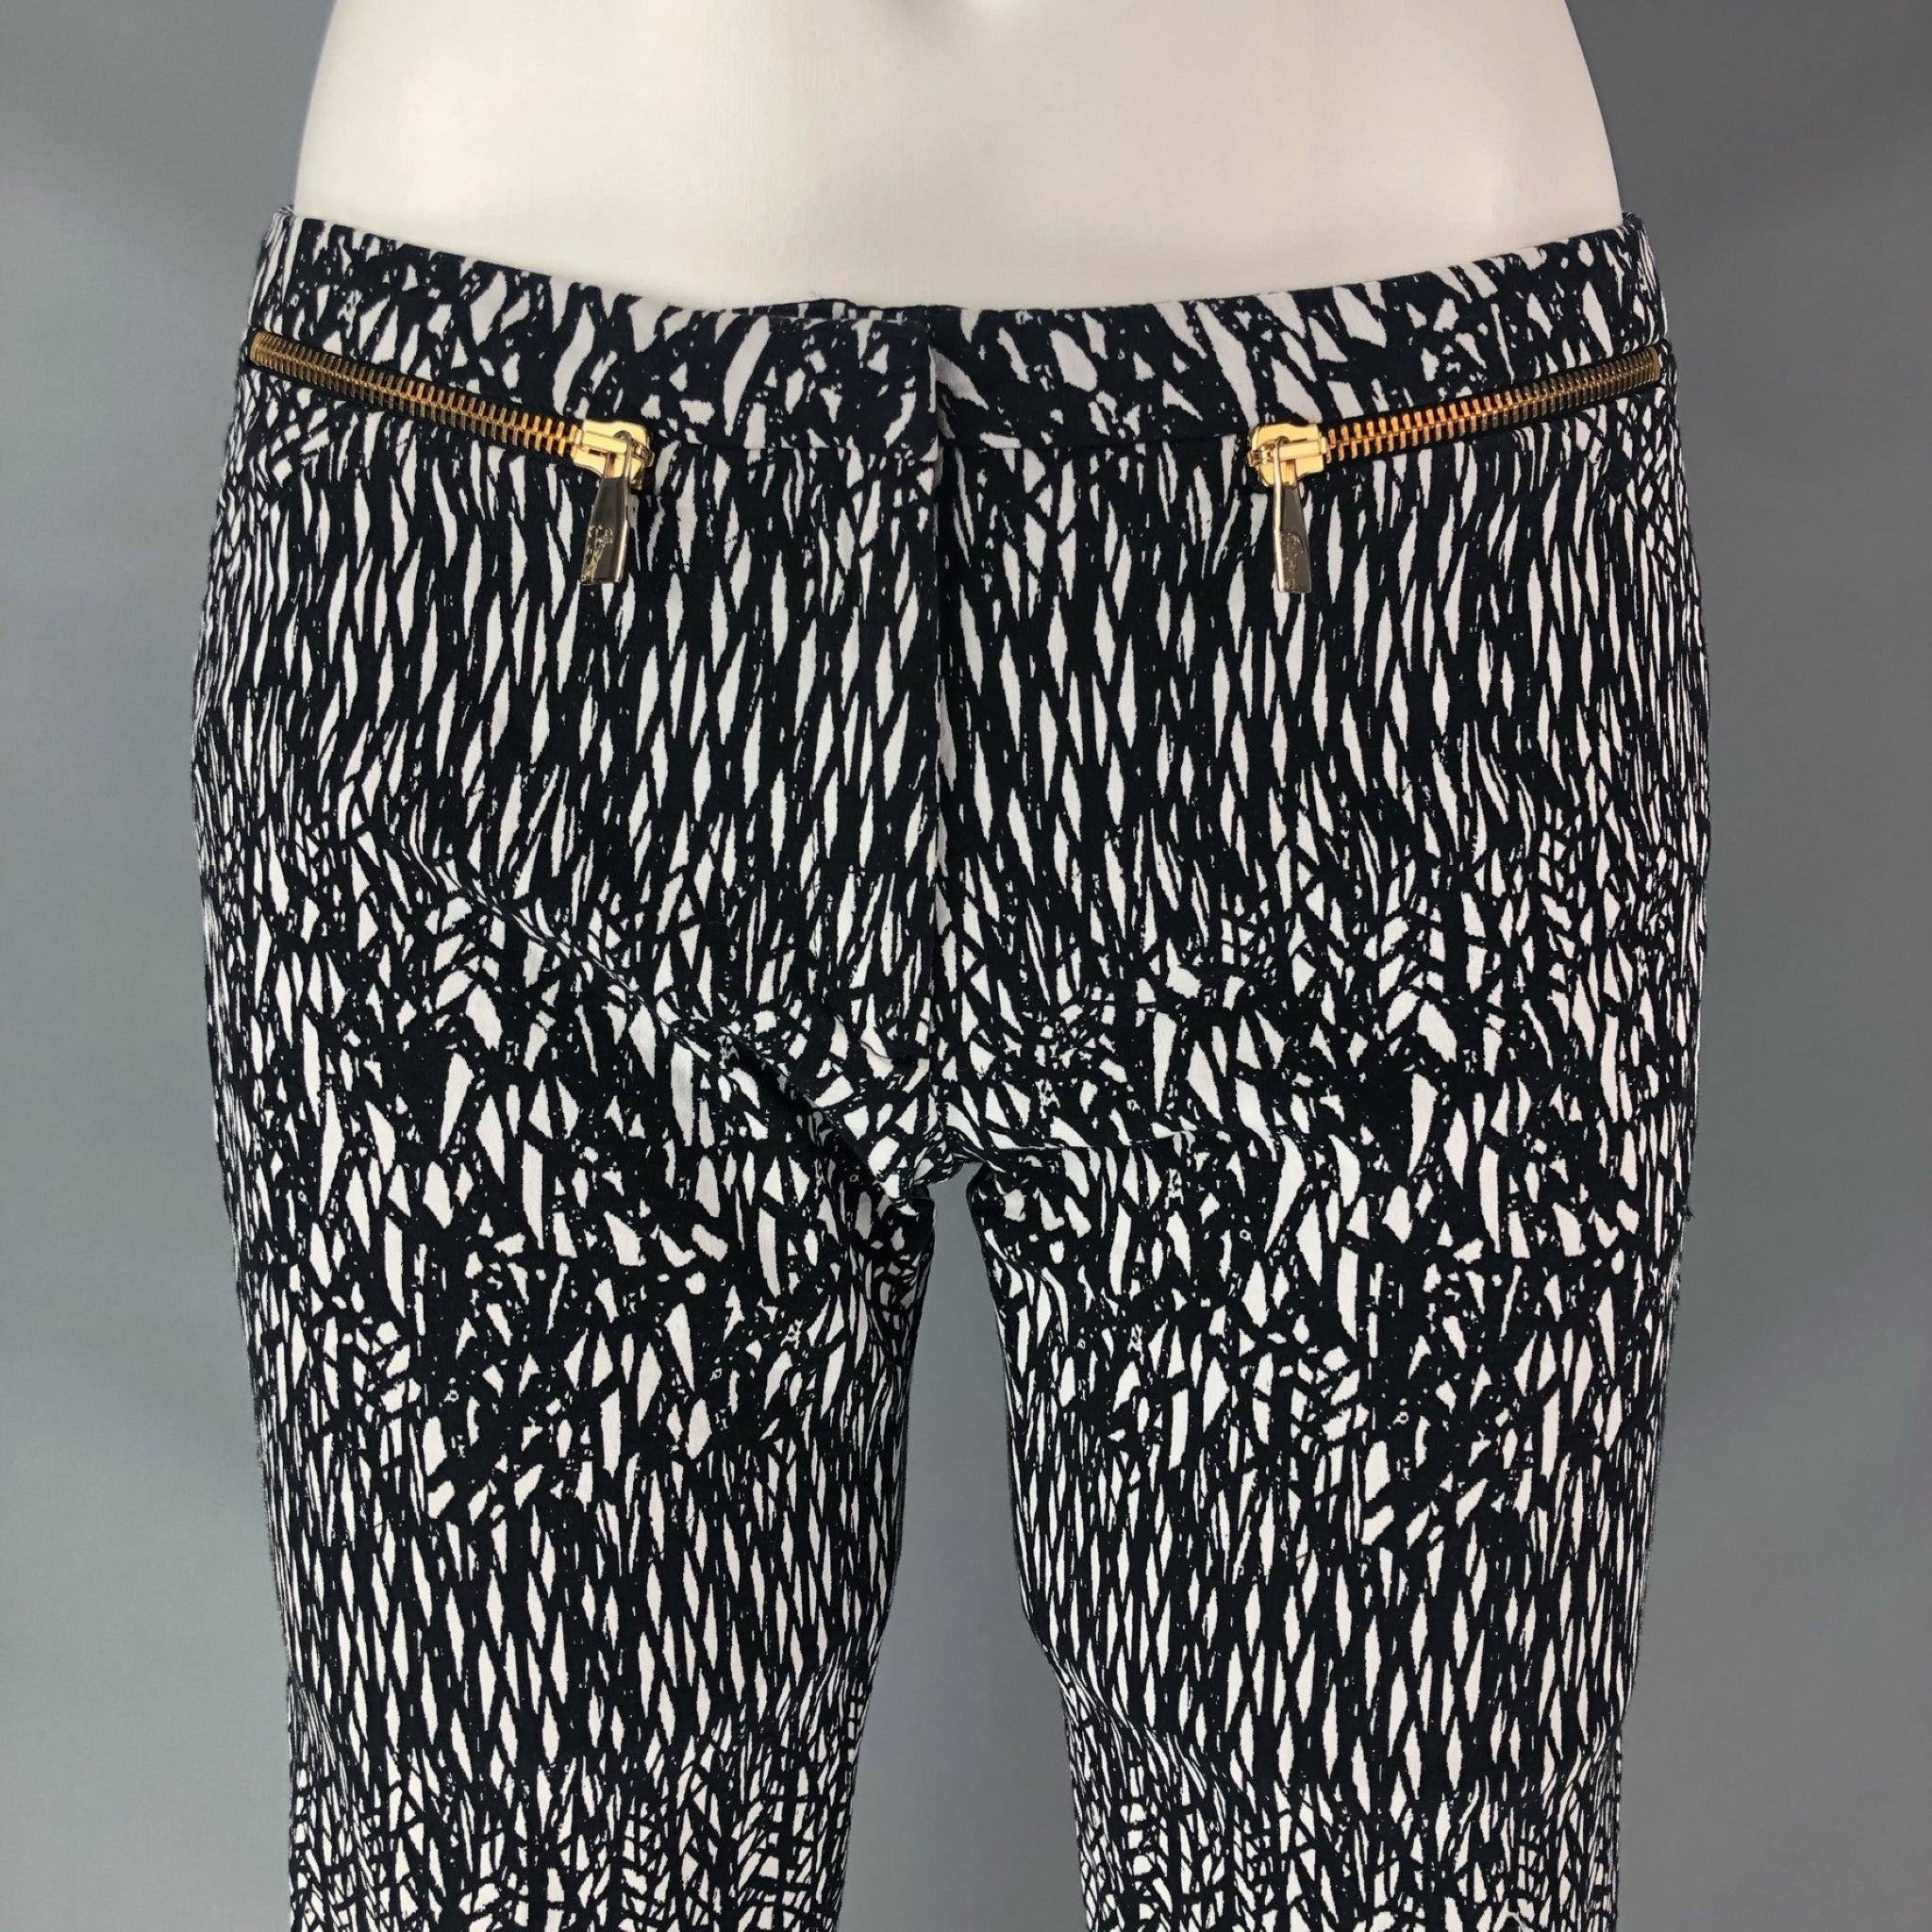 VERSACE COLLECTION Slim casual pants comes in a black and white abstract cotton blend fabric featuring gold hardware Flat Front, zipper hook and bar closure. Excellent Pre-Owned Condition.  

Marked:   40 IT 

Measurements: 
  Waist: 31 inRise: 7.5